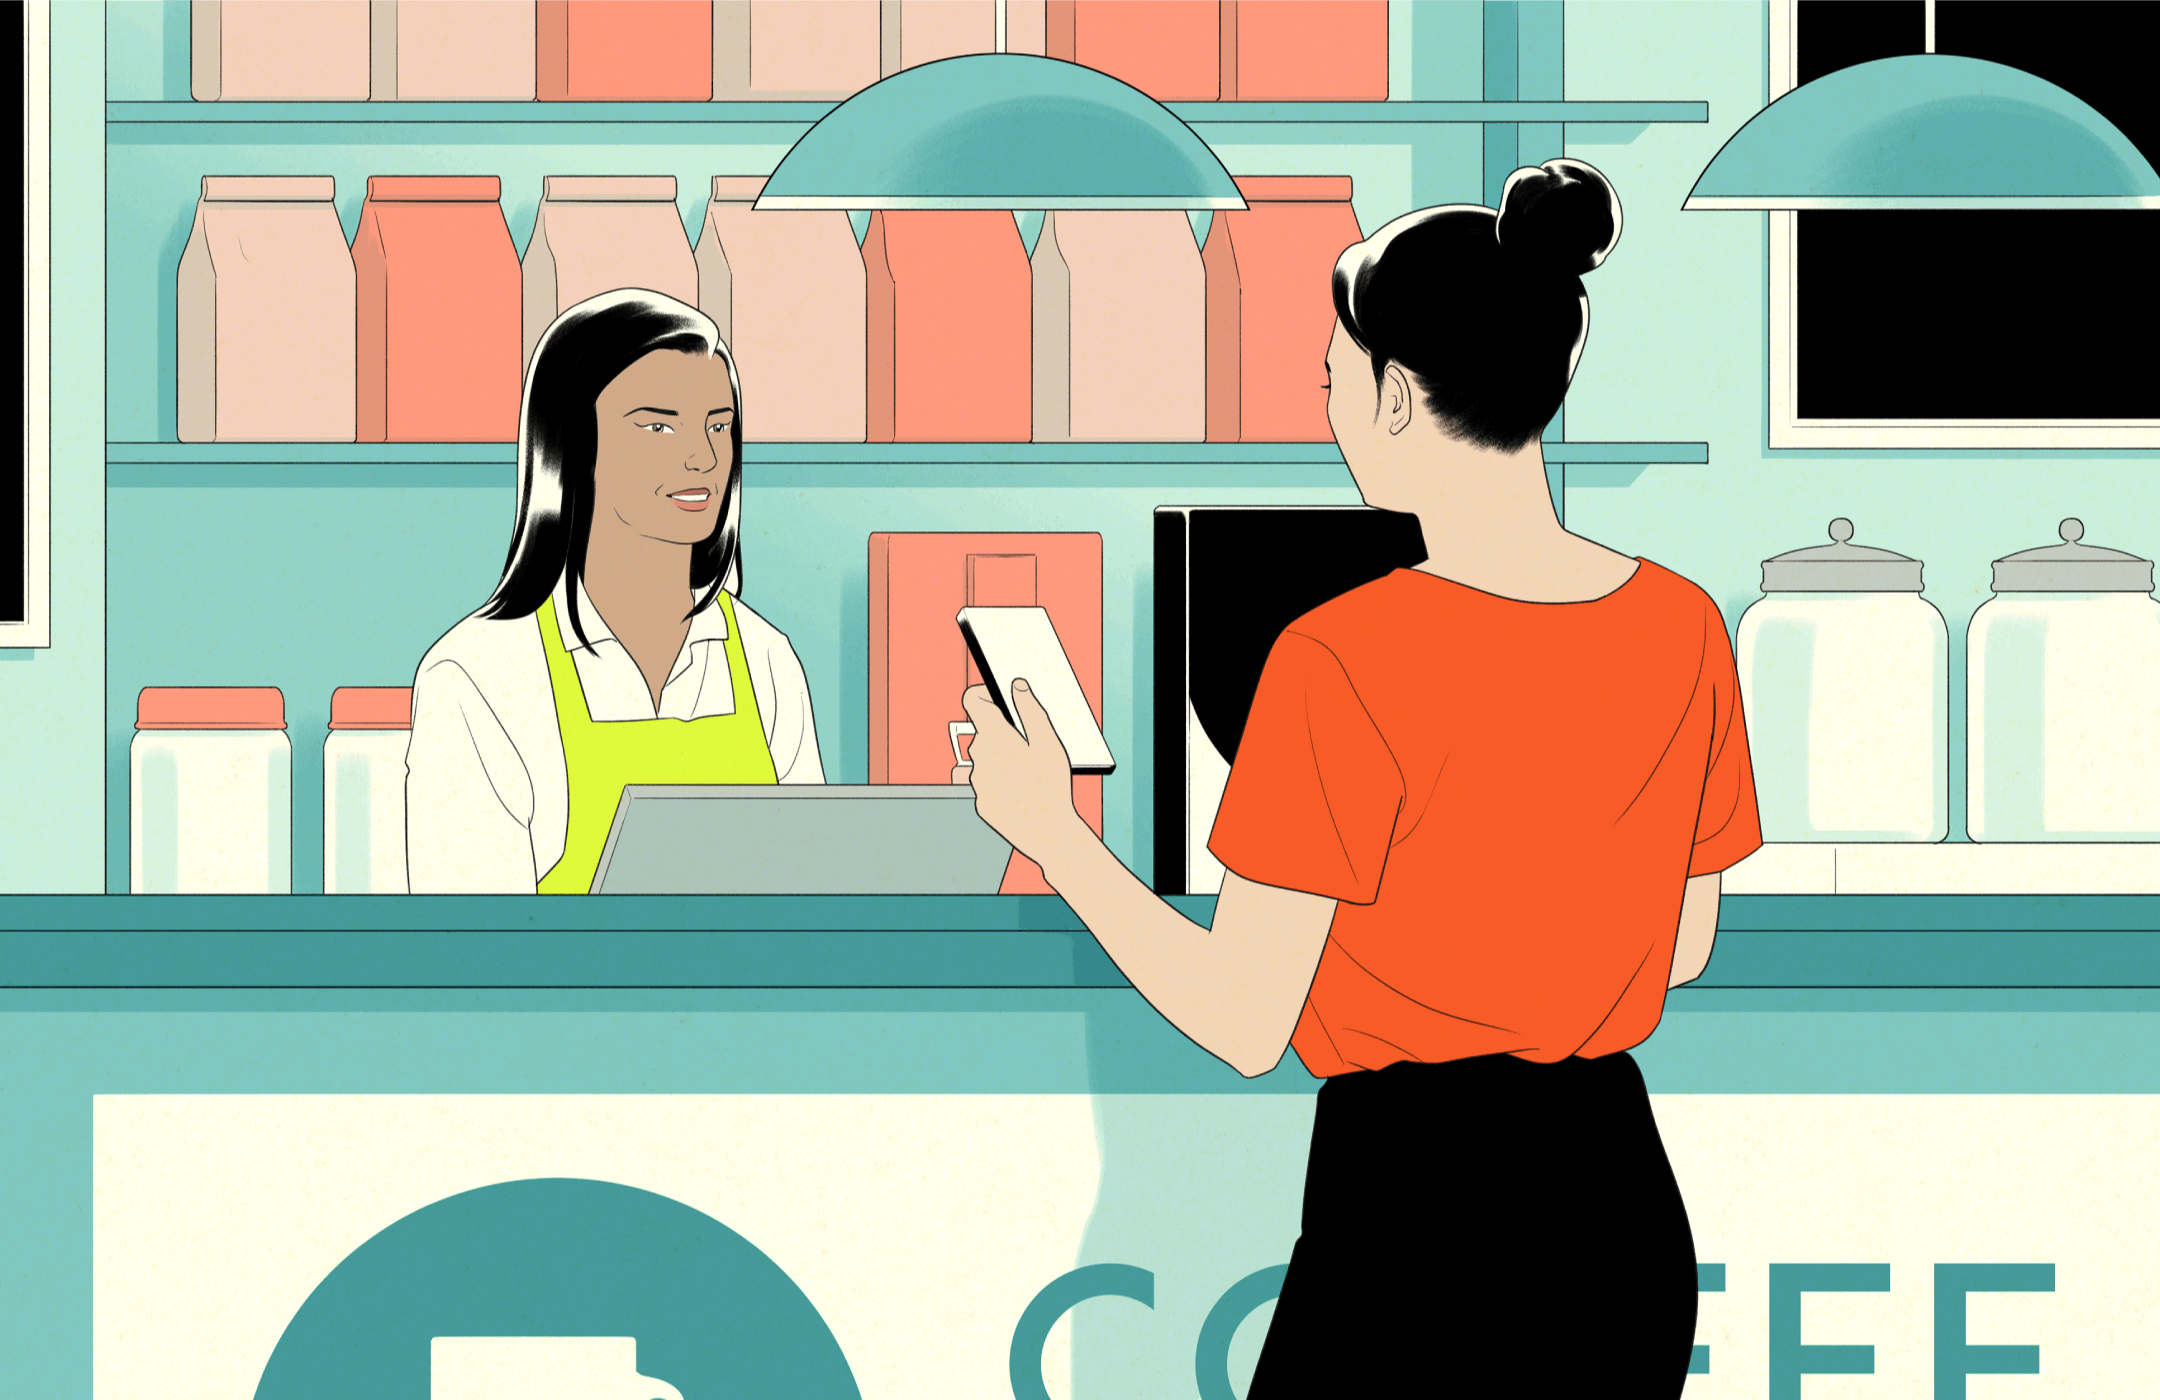 Illustration of a woman at a coffee counter interacting with a cashier